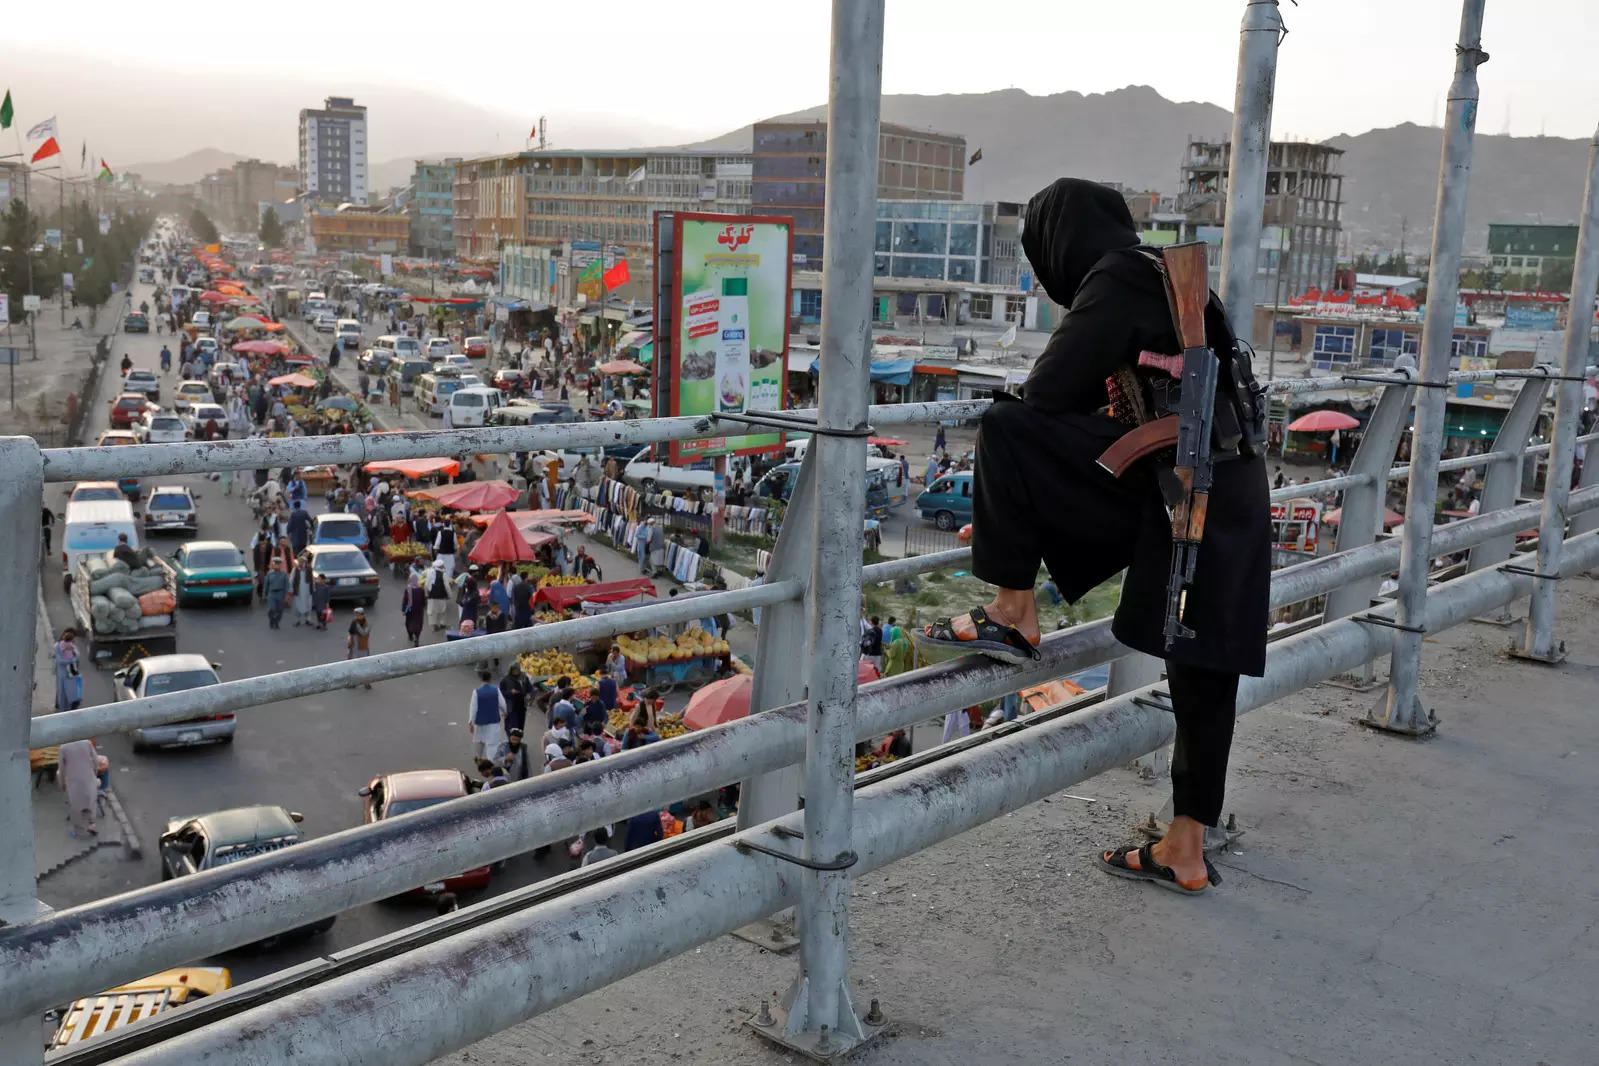 A Taliban fighter stands guard on a bridge in Kabul 